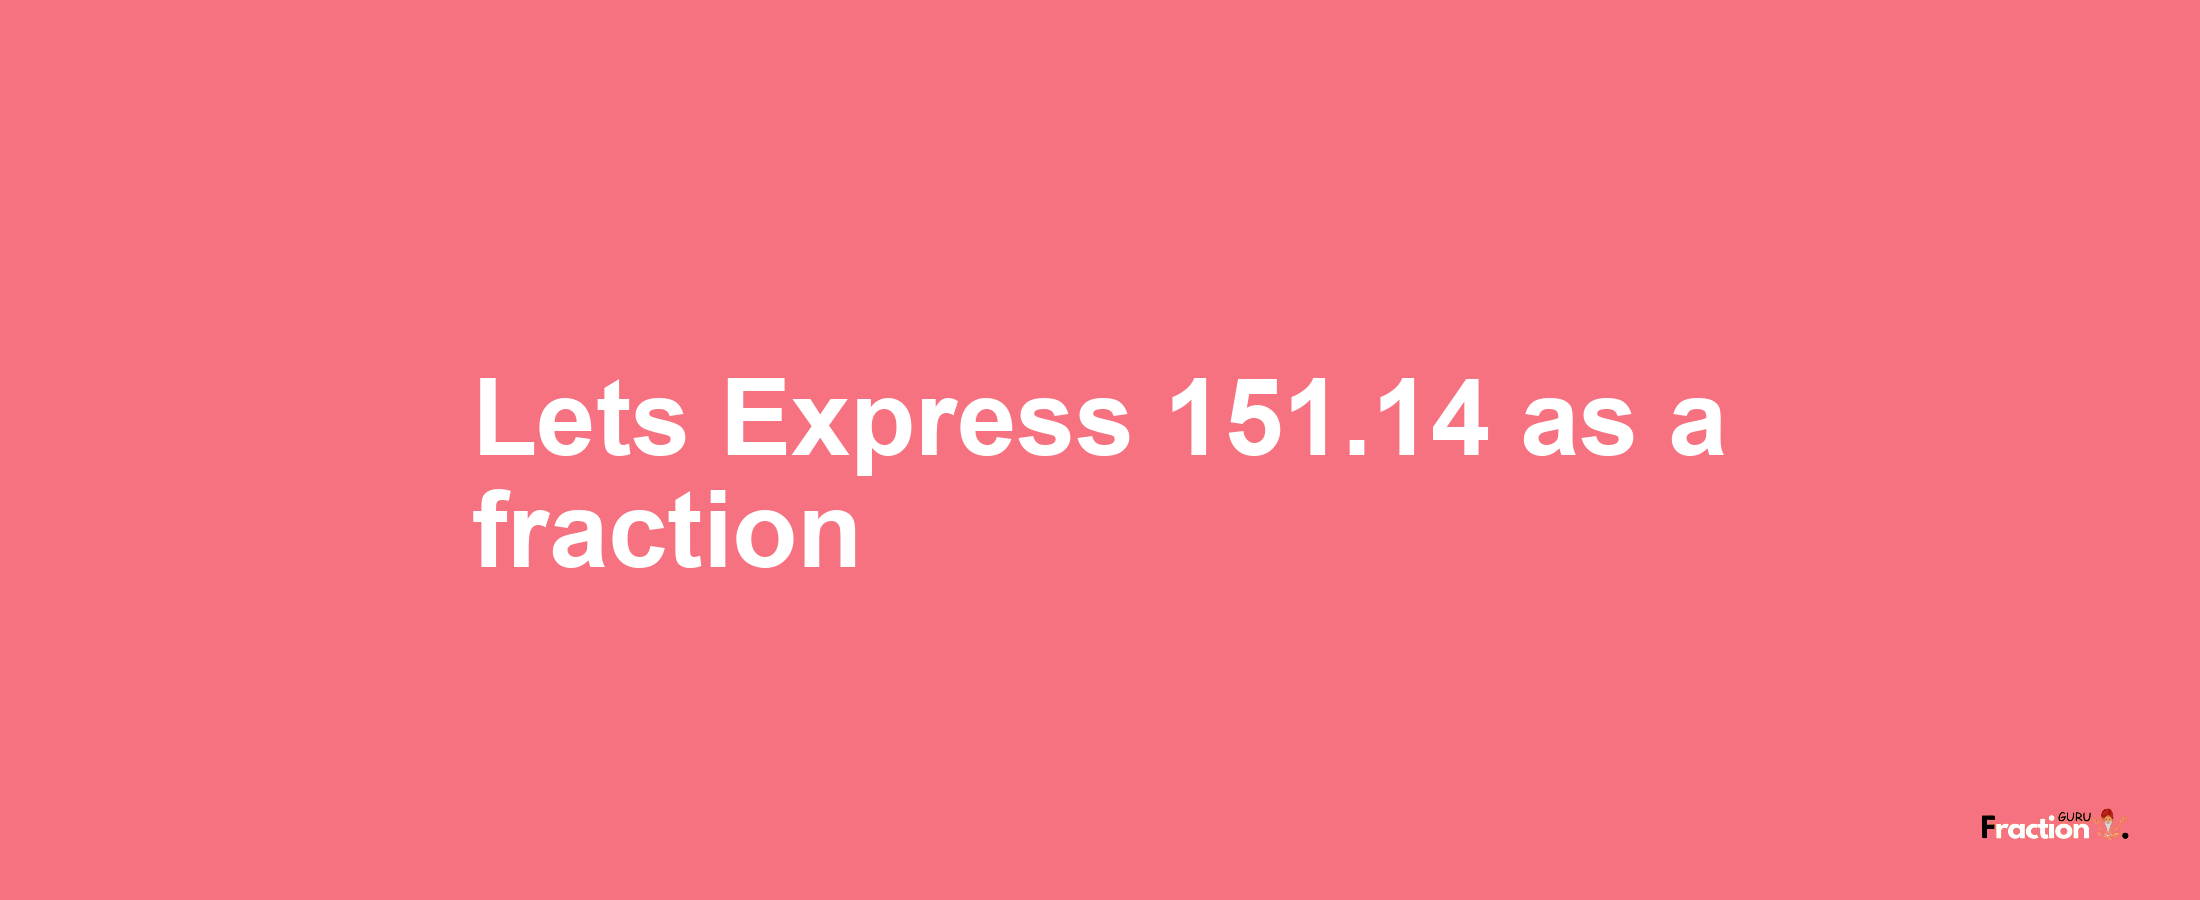 Lets Express 151.14 as afraction